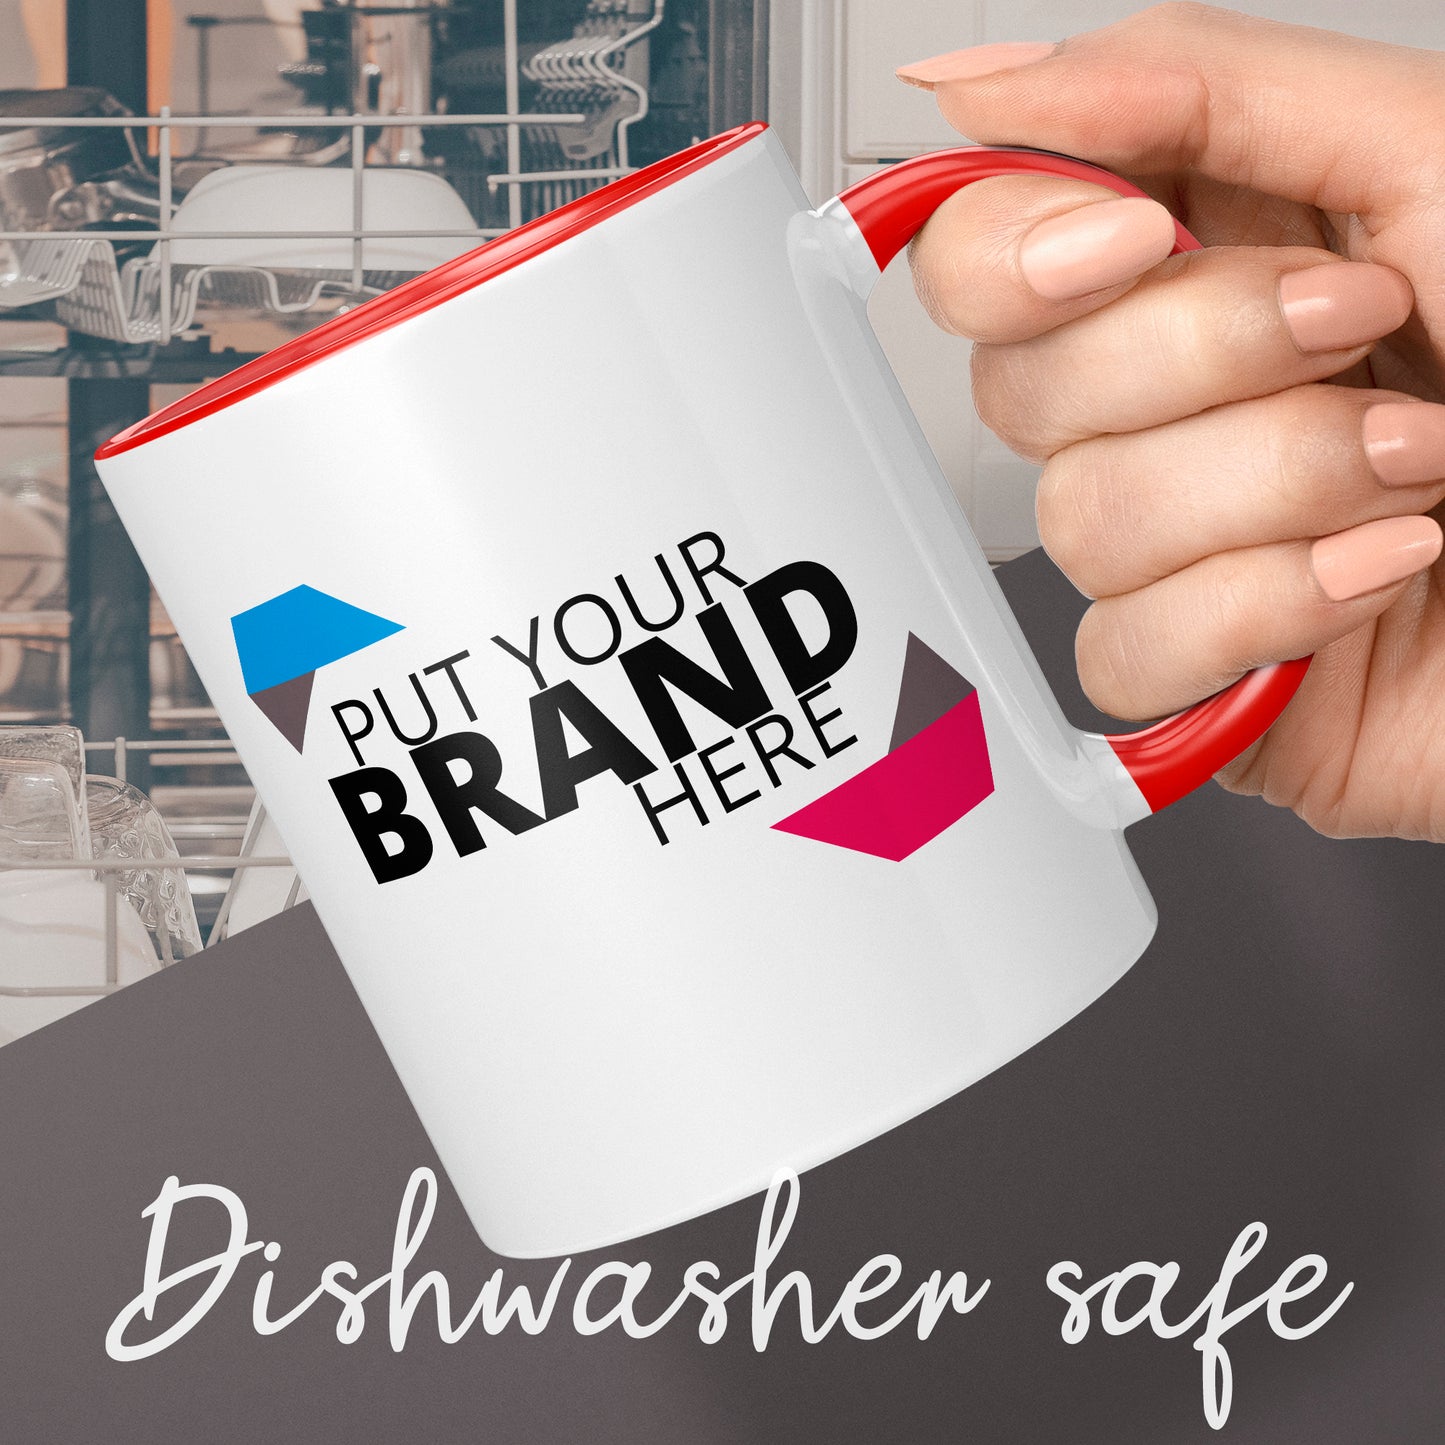 Branded Mugs (RED) - Fully Inclusive Pricing Full Colour Both Sides &  Free Delivery